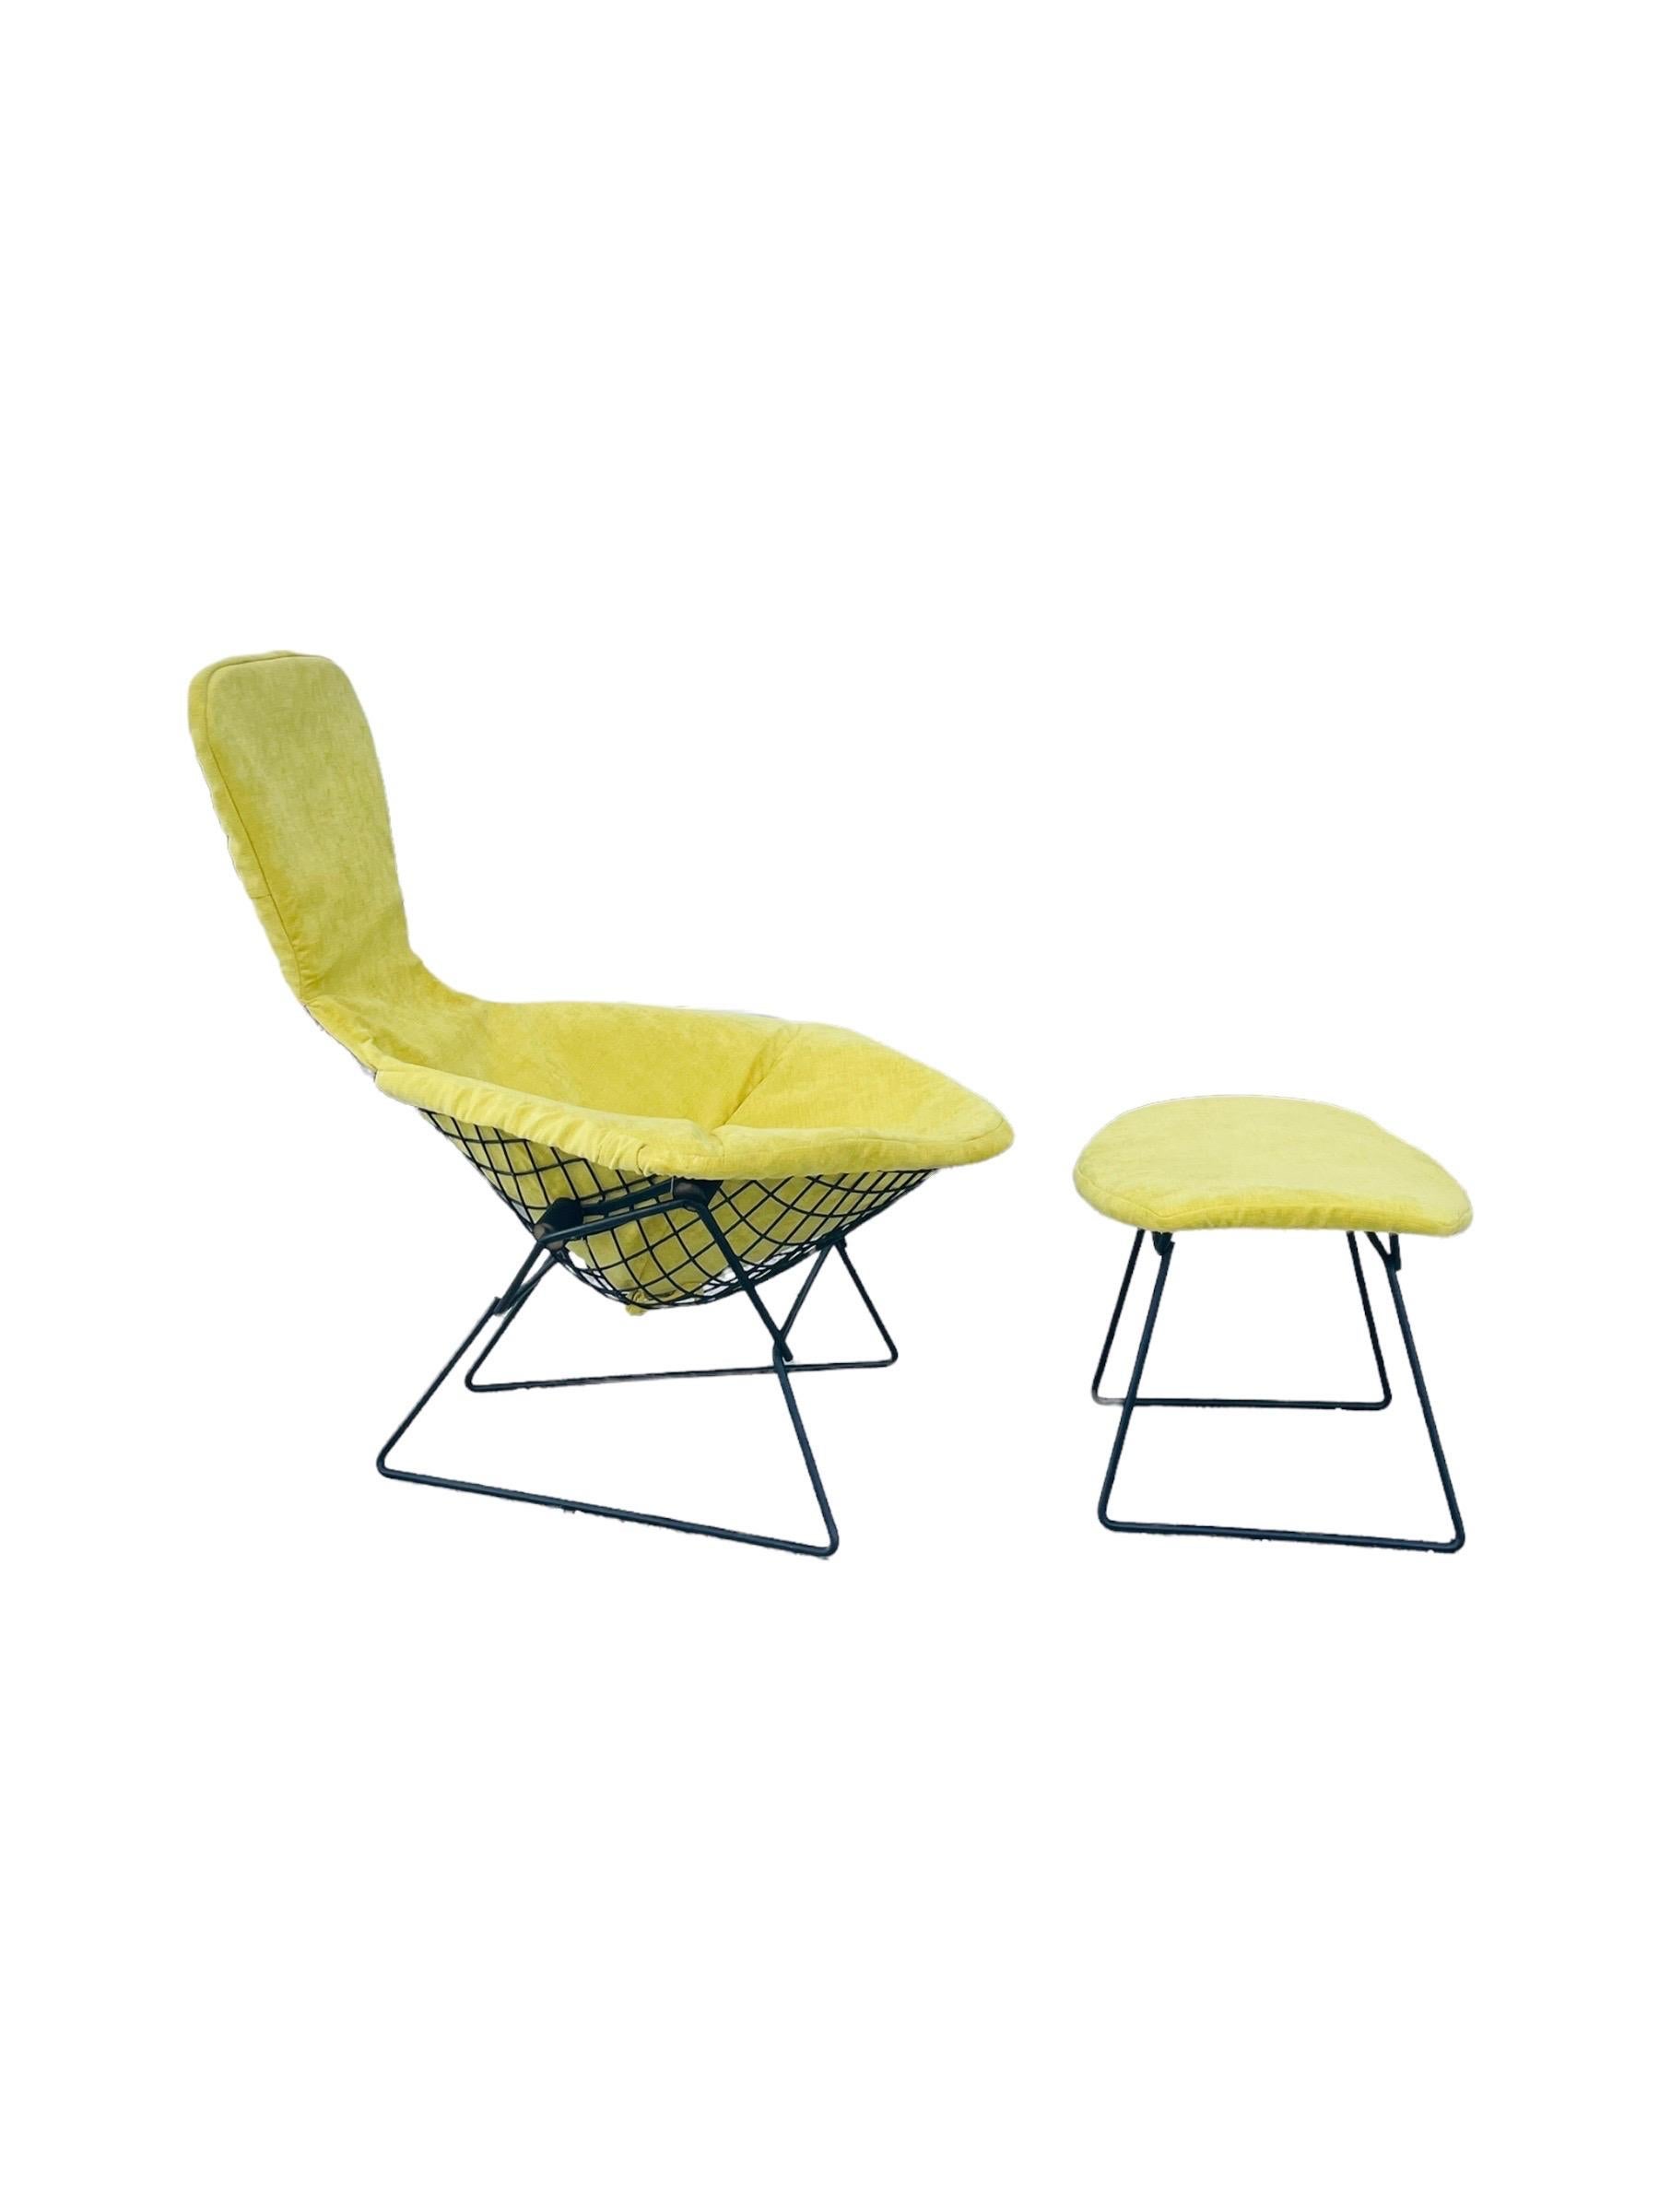 Stunning Mid-Century Modern “Bird Chair”with matching ottoman designed by Harry Bertoia for Knoll. This beautiful chair is newly reupholstered in Yellow krypton Fabric. The fabric is stain resistant and extremely durable. Frame has some repair